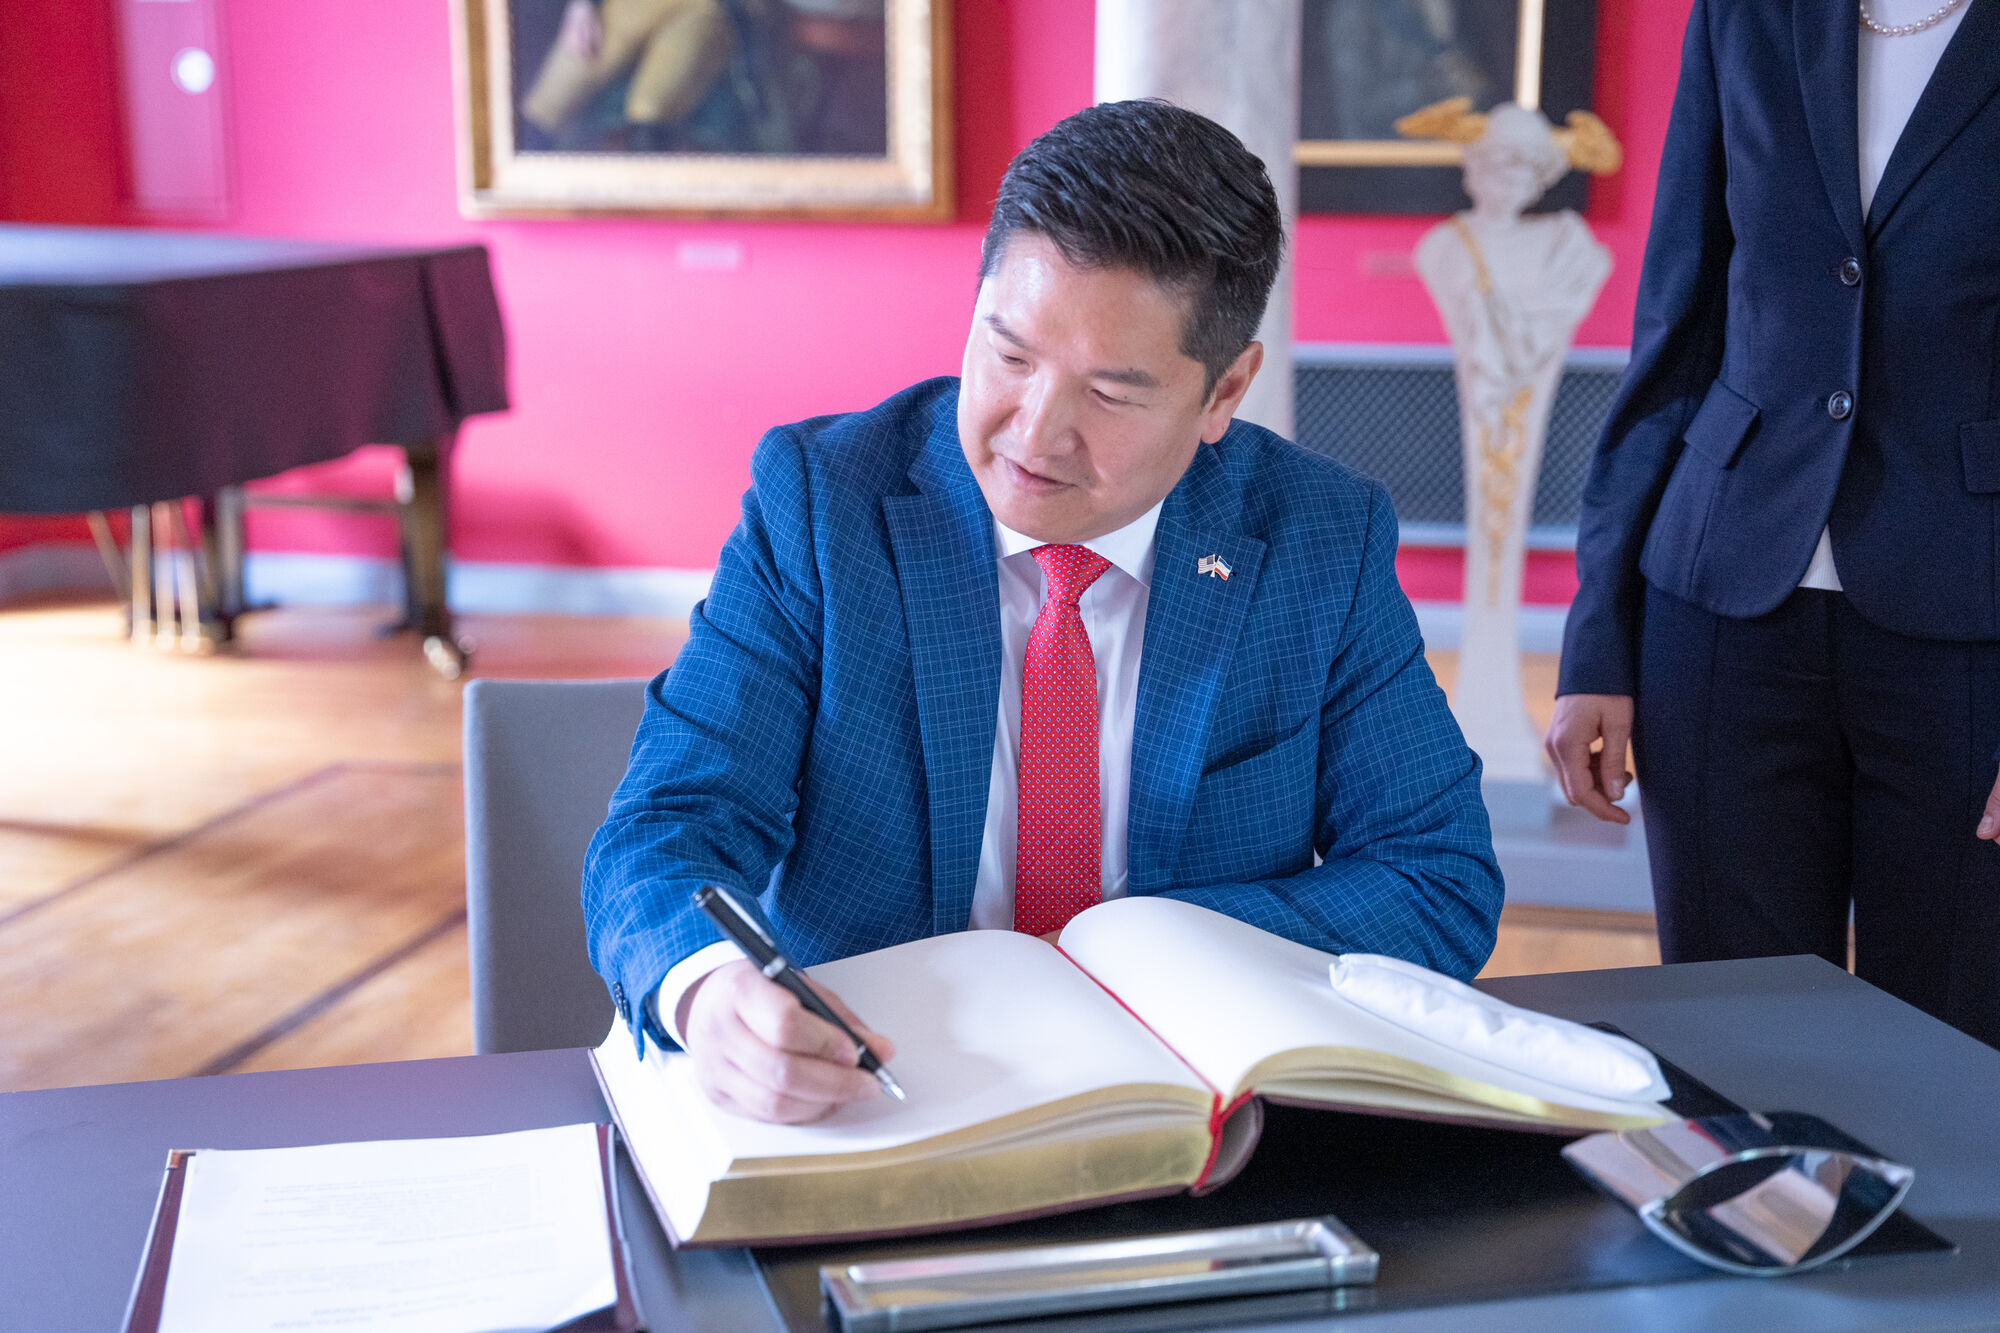 Jason Chue, U.S. General Consul in Hamburg, signing the University of Greifswald’s guest book